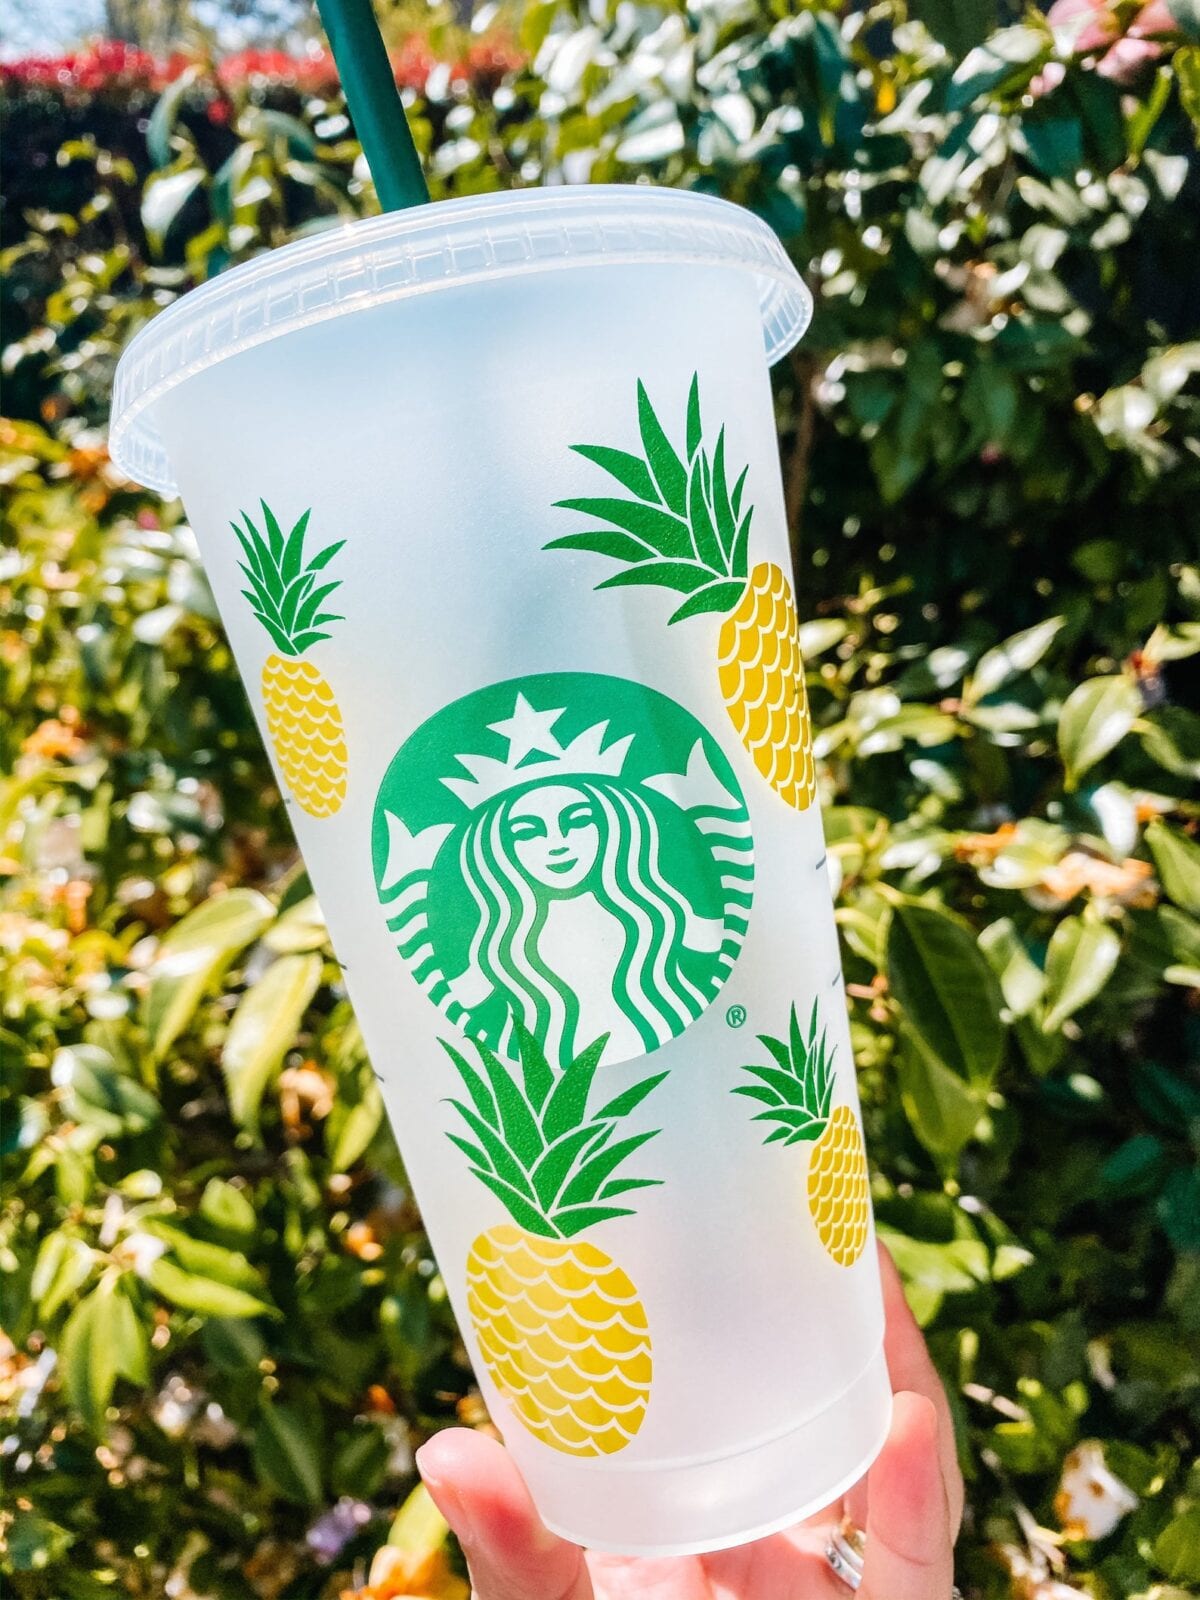 You Can Get A Starbucks Cup That Is Covered In Pineapples That Is Perfect For Summer Sippin'